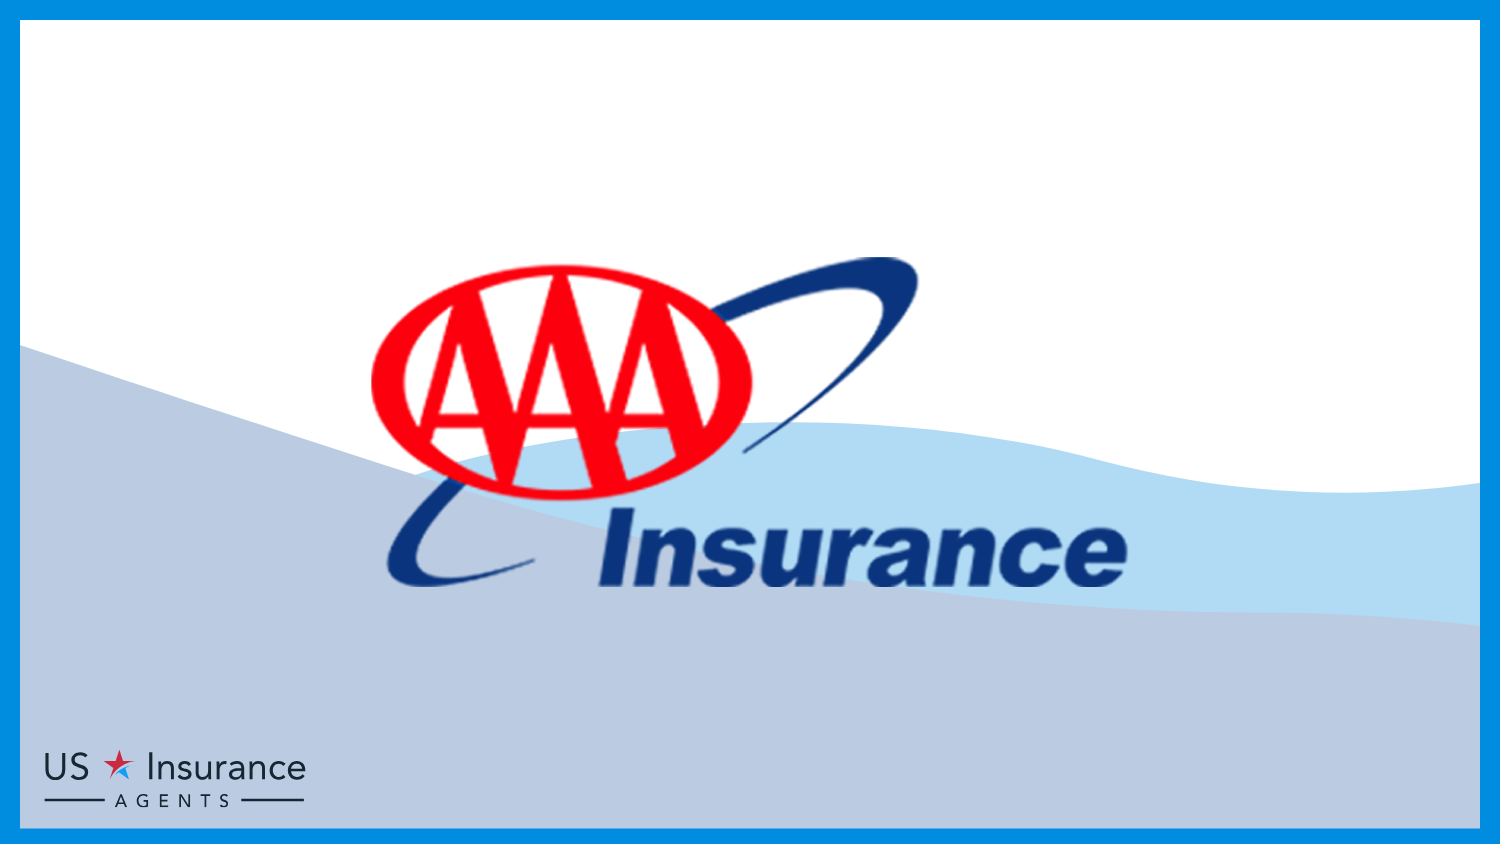 Best Car Insurance for Engineers: AAA Insurance